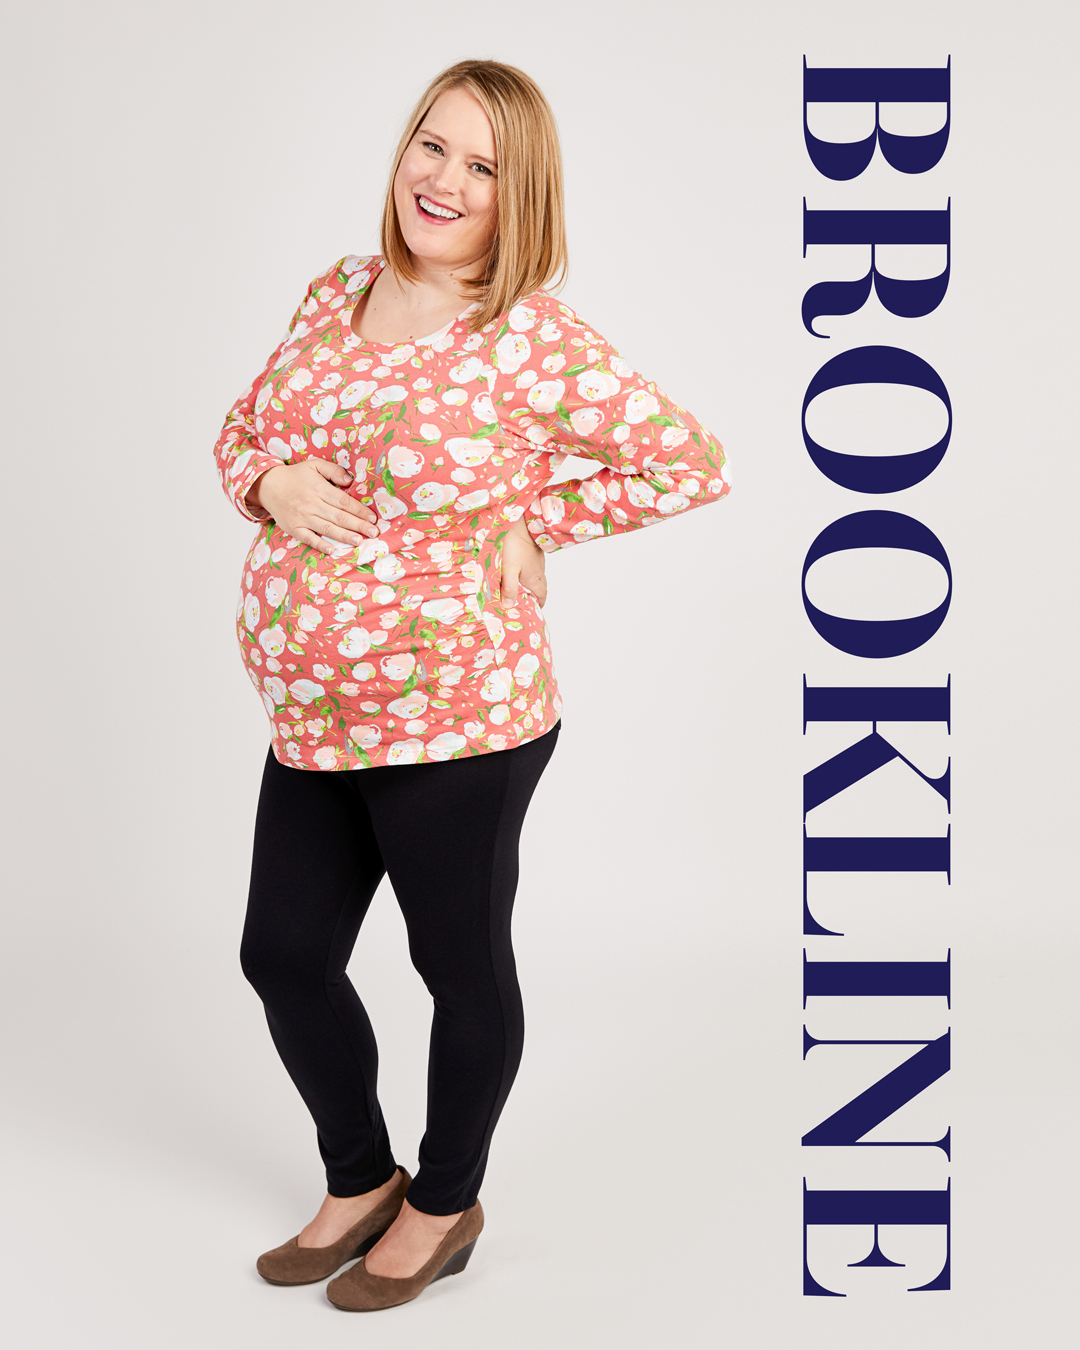 Introducing the Brookline Maternity T-Shirt and the Nursing Expansion!